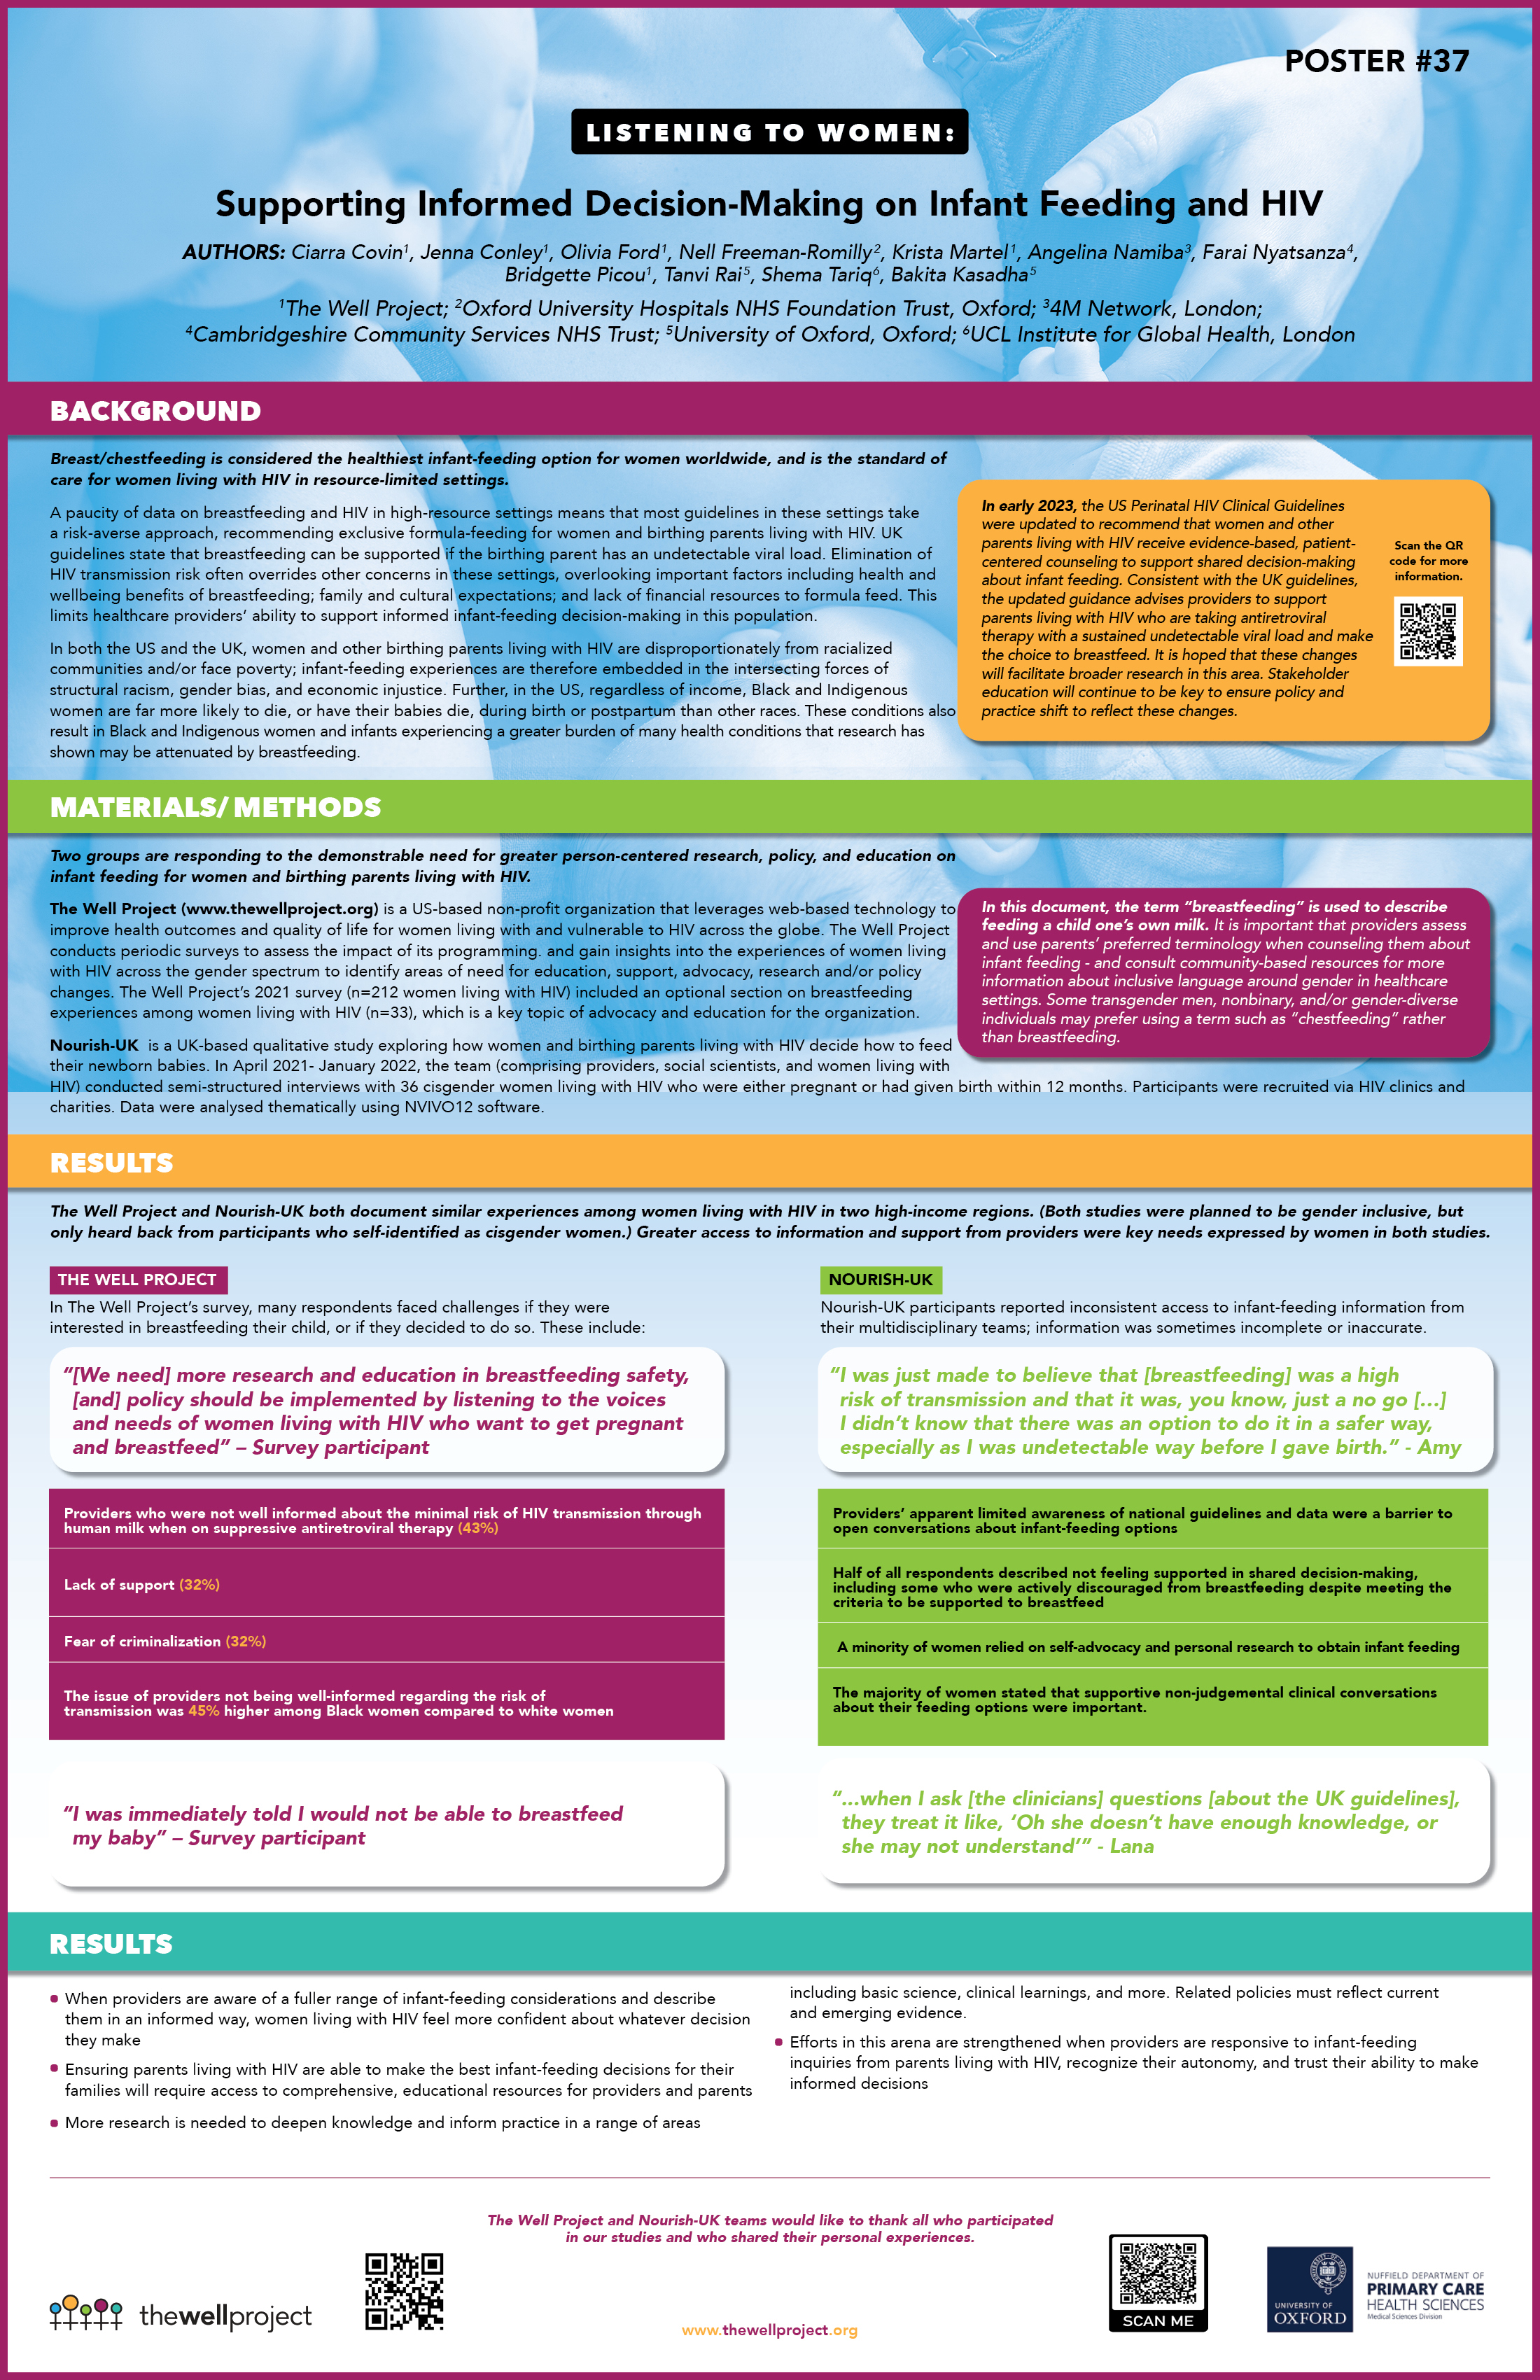 Listening to Women: Supporting Informed Decision-Making on Infant Feeding and HIV poster.